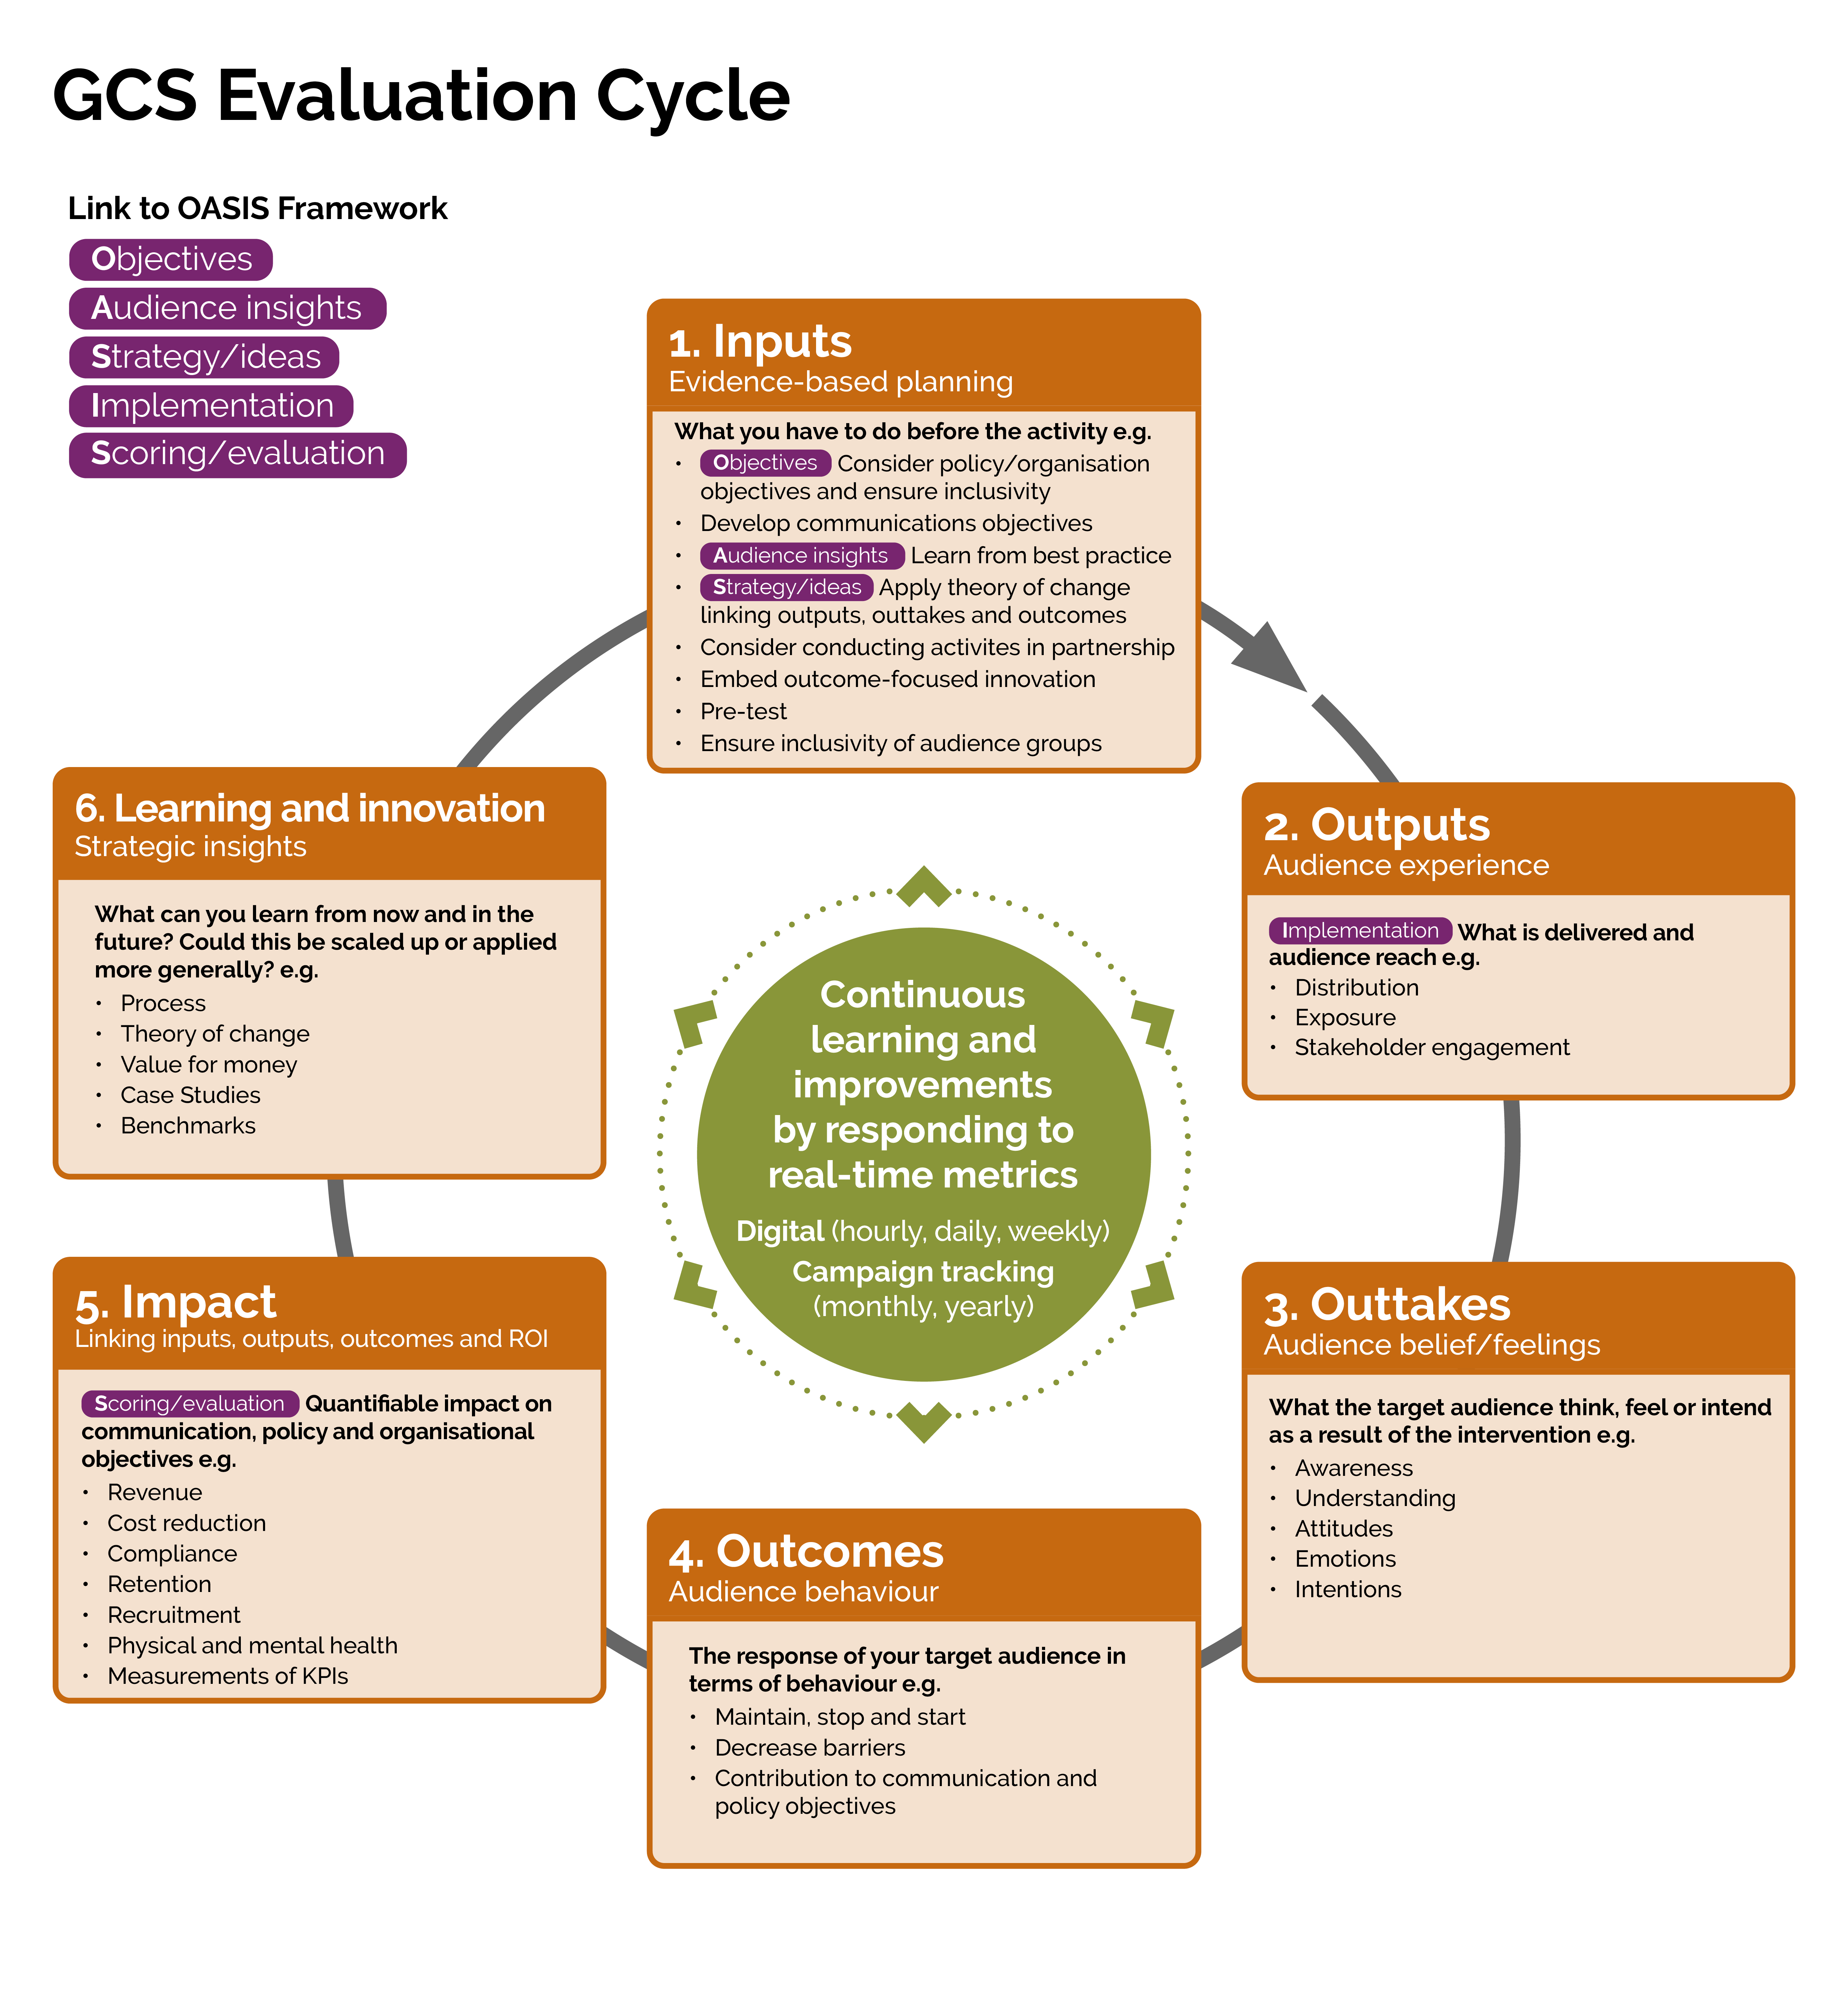 A diagram of the Evaluation Cycle, which shows a cyclical process with 6 steps (Inputs, Outputs, Outtakes, Outcomes, Impact, and Learning and Innovation), the core of Continuous Learning and Improvements in the middle, and linkages of OASIS elements to Inputs, Outputs, and Impact stages. 